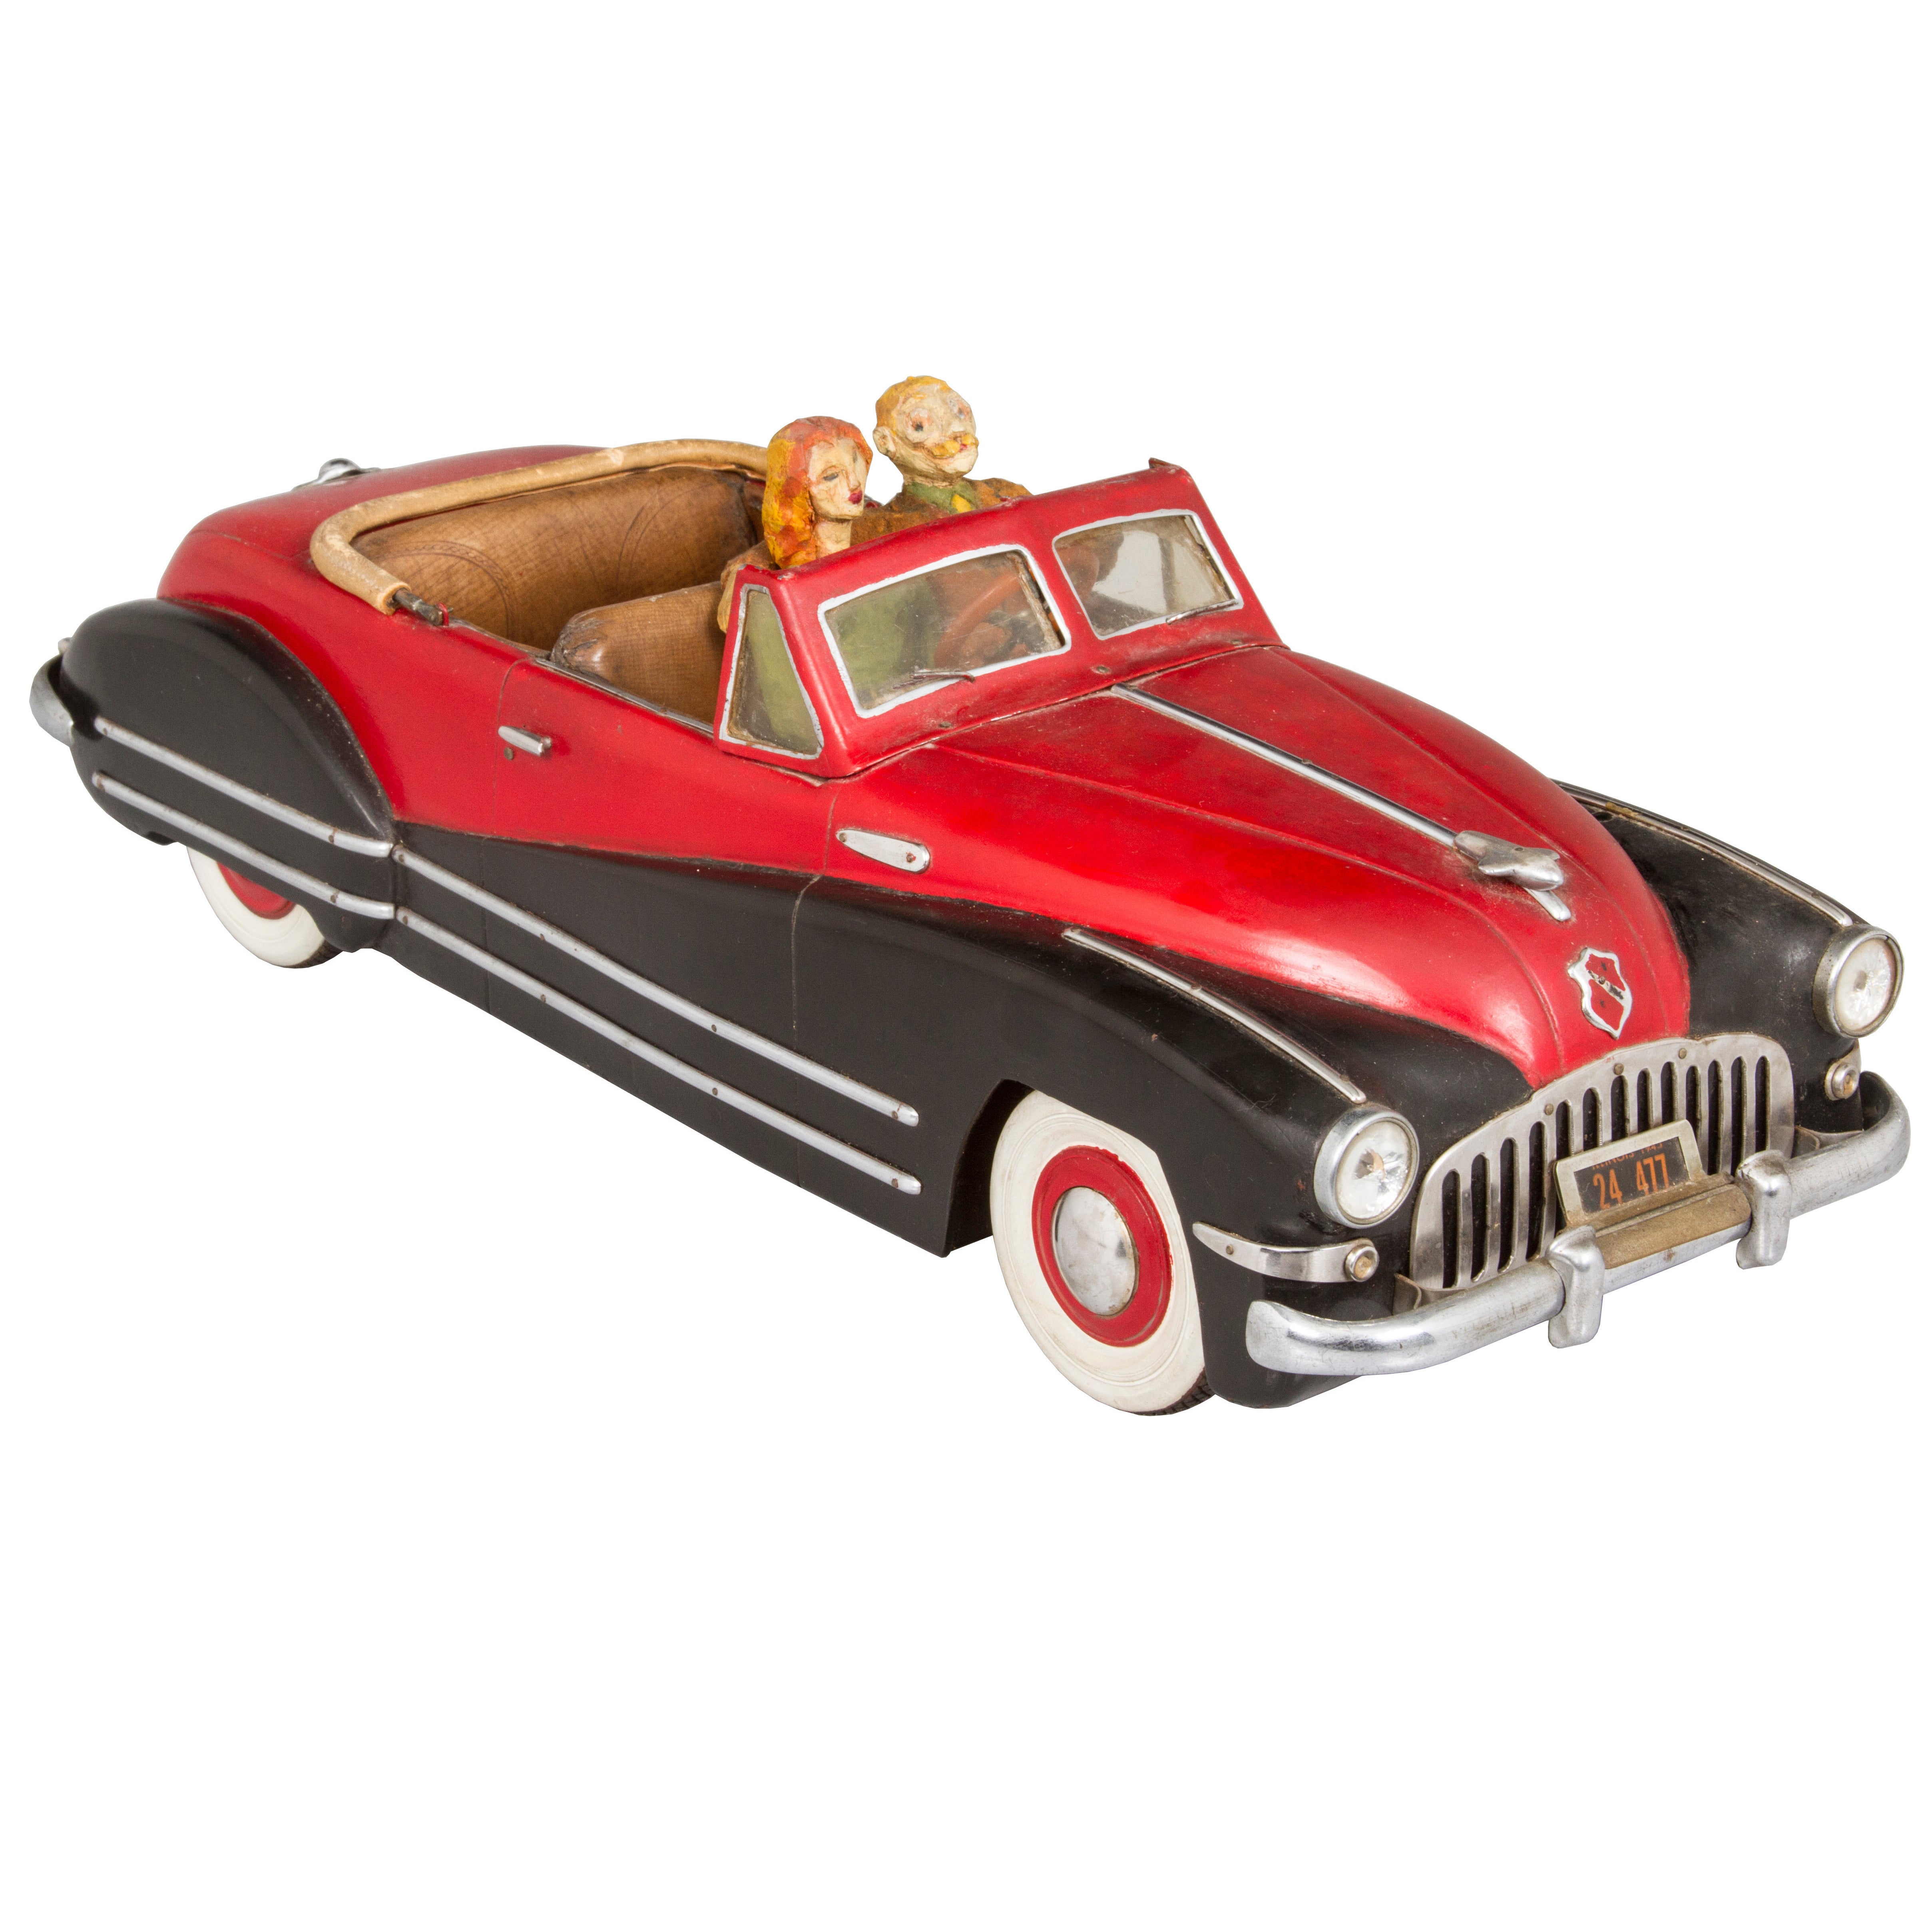 Hand-Carved Wooden 1942 Buick Convertible